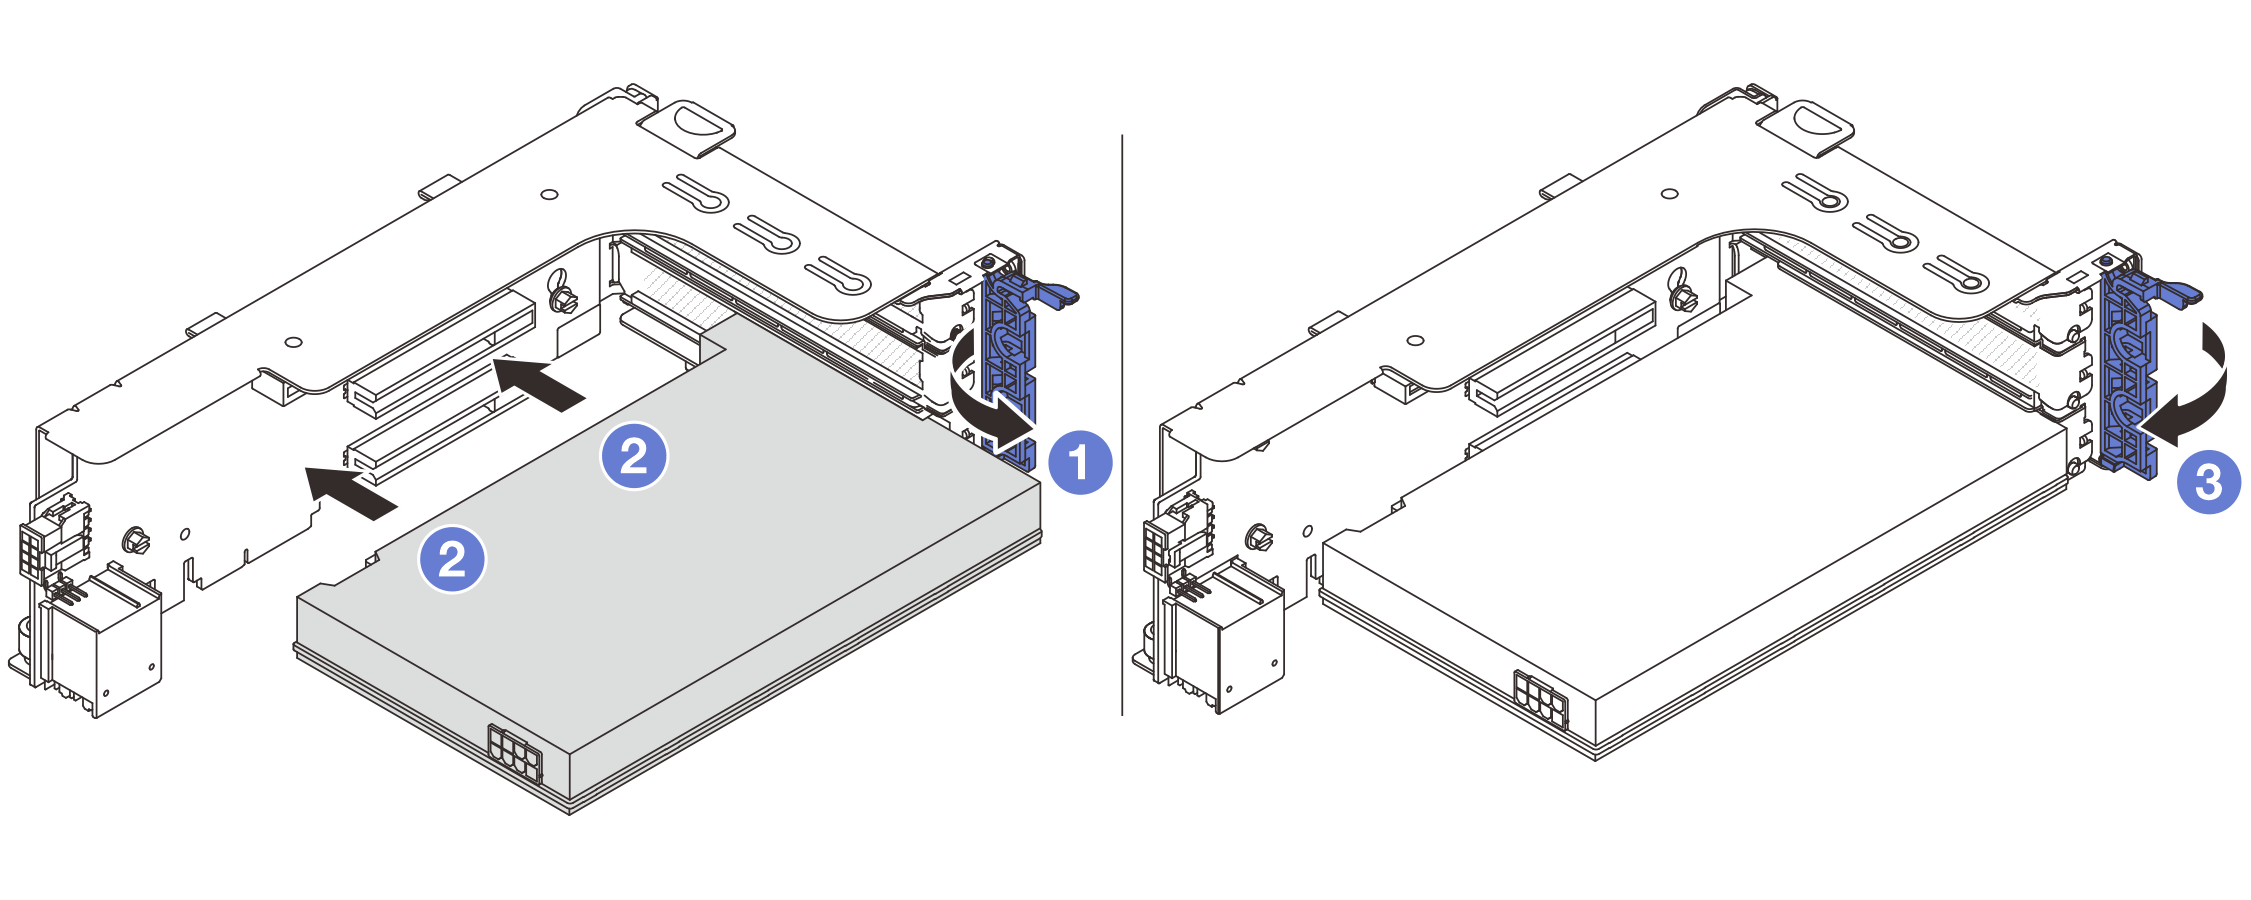 Installing the PCIe adapter on riser 1 or 2 assembly